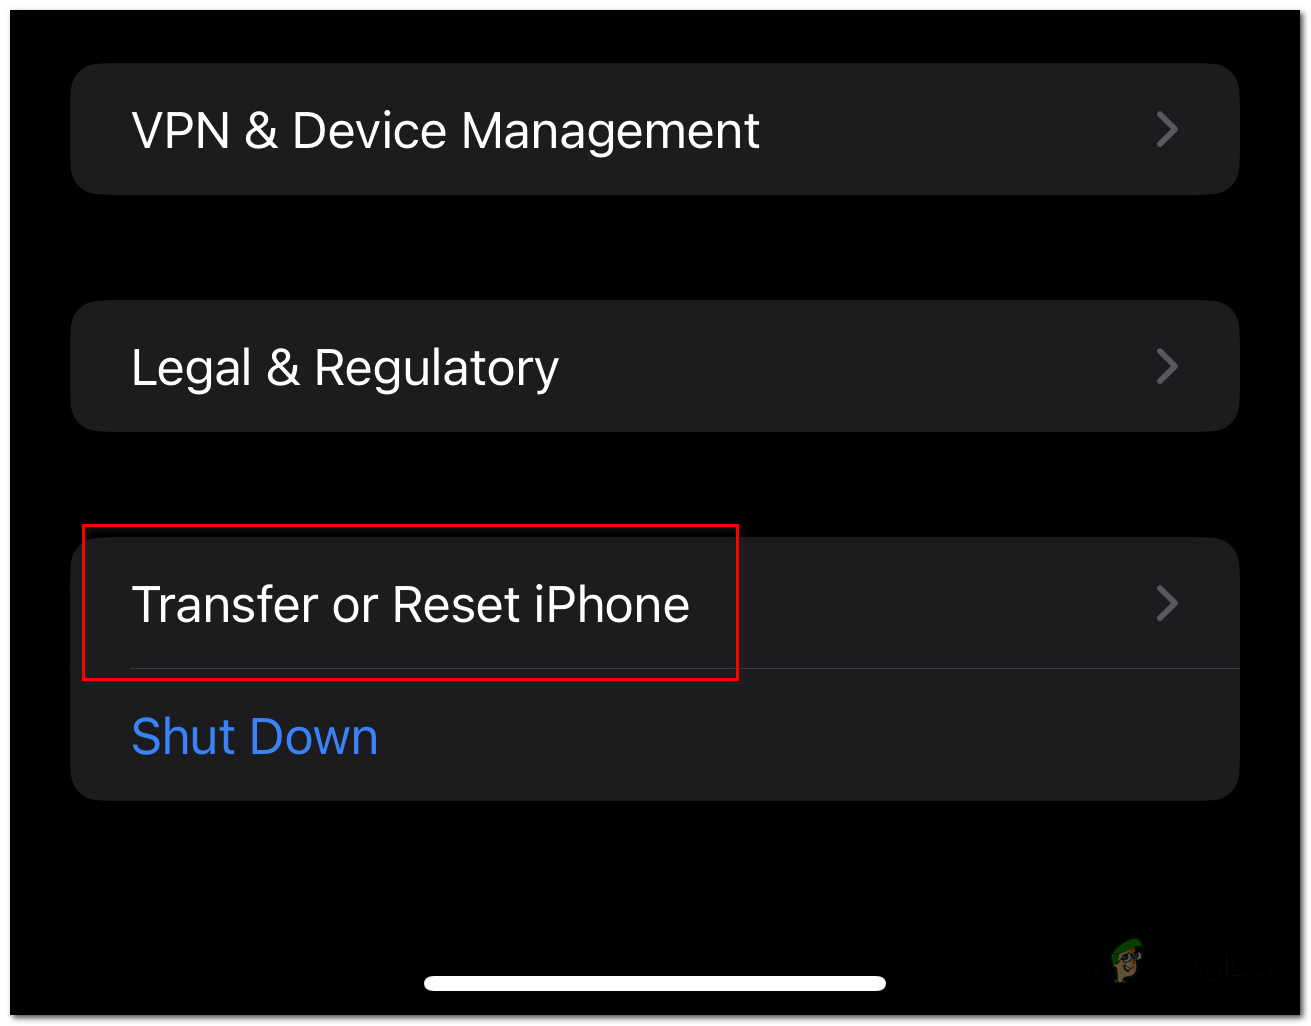 Scroll down and go to "Transfer or Reset iPhone", and then tap Reset.